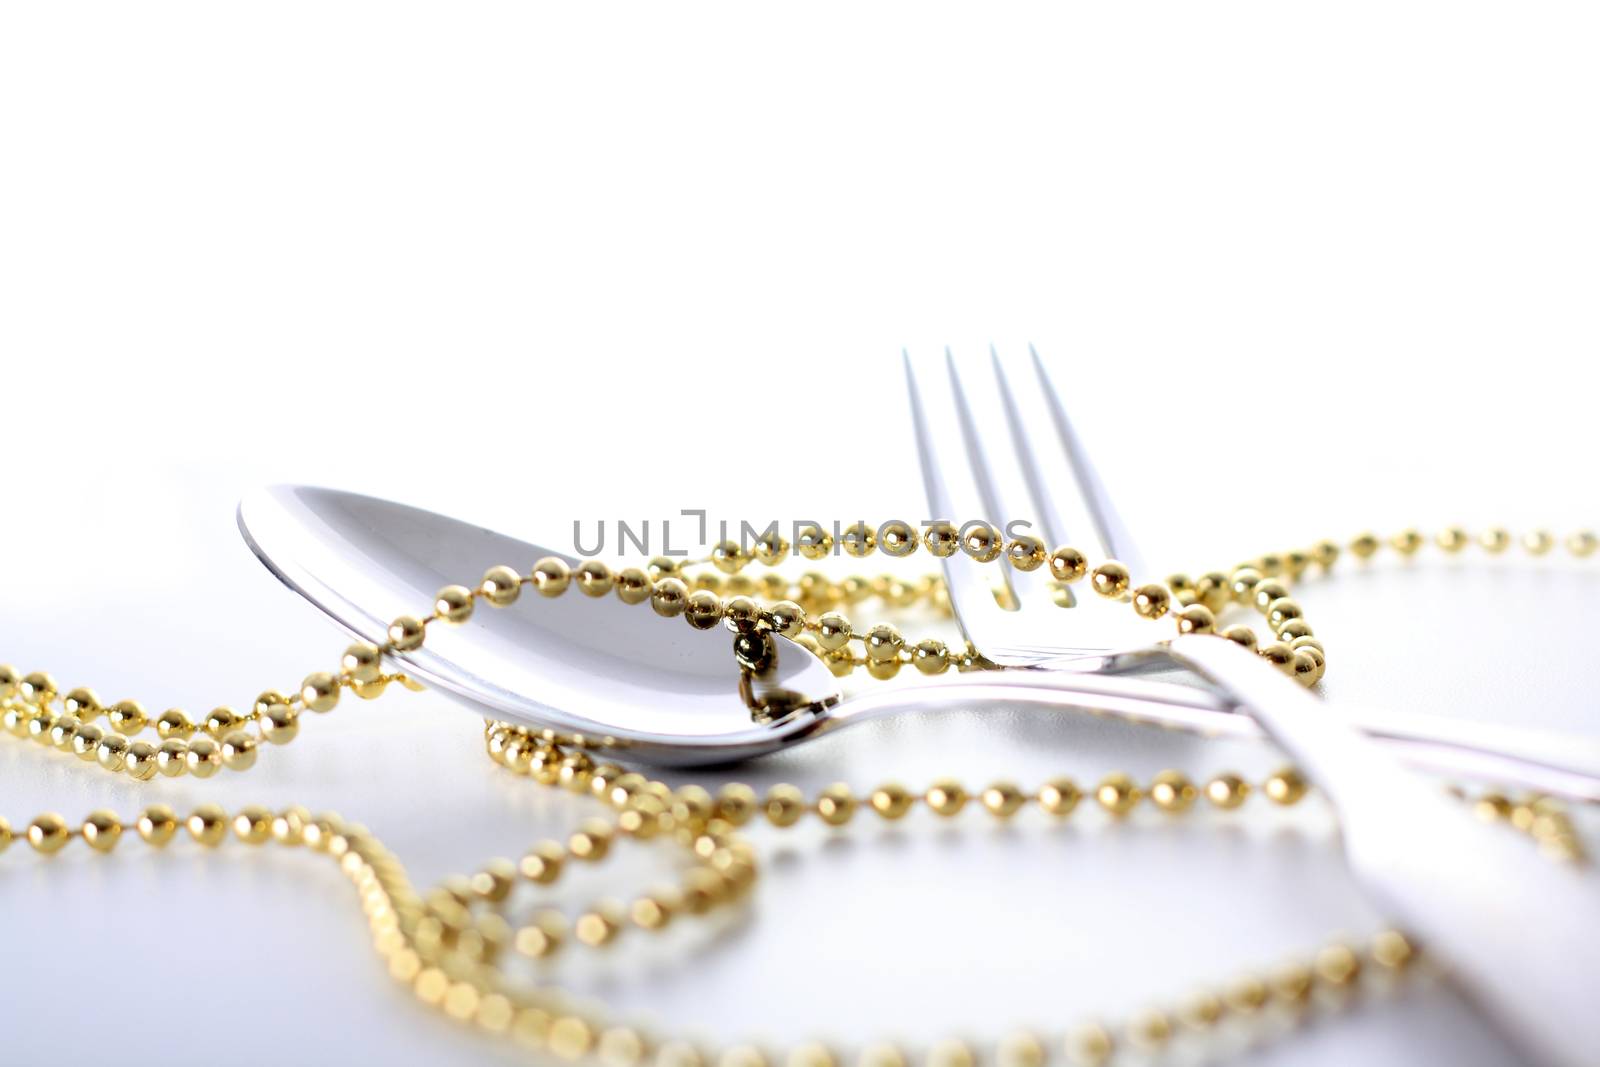  spoon and fork with decoration and white background 